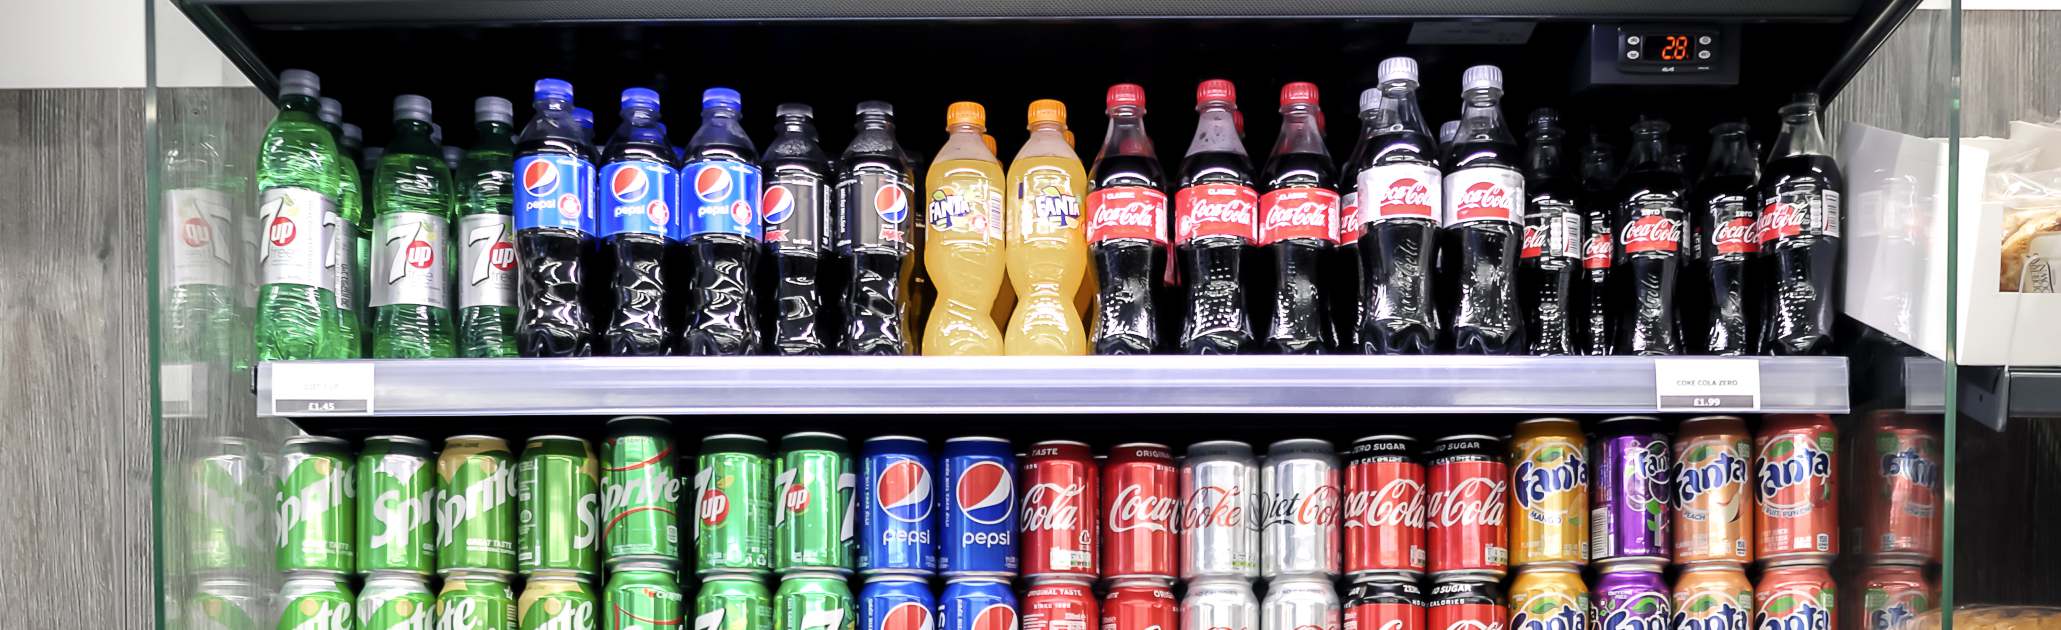 We can supply newsagents, to keep drinks and food chilled or frozen